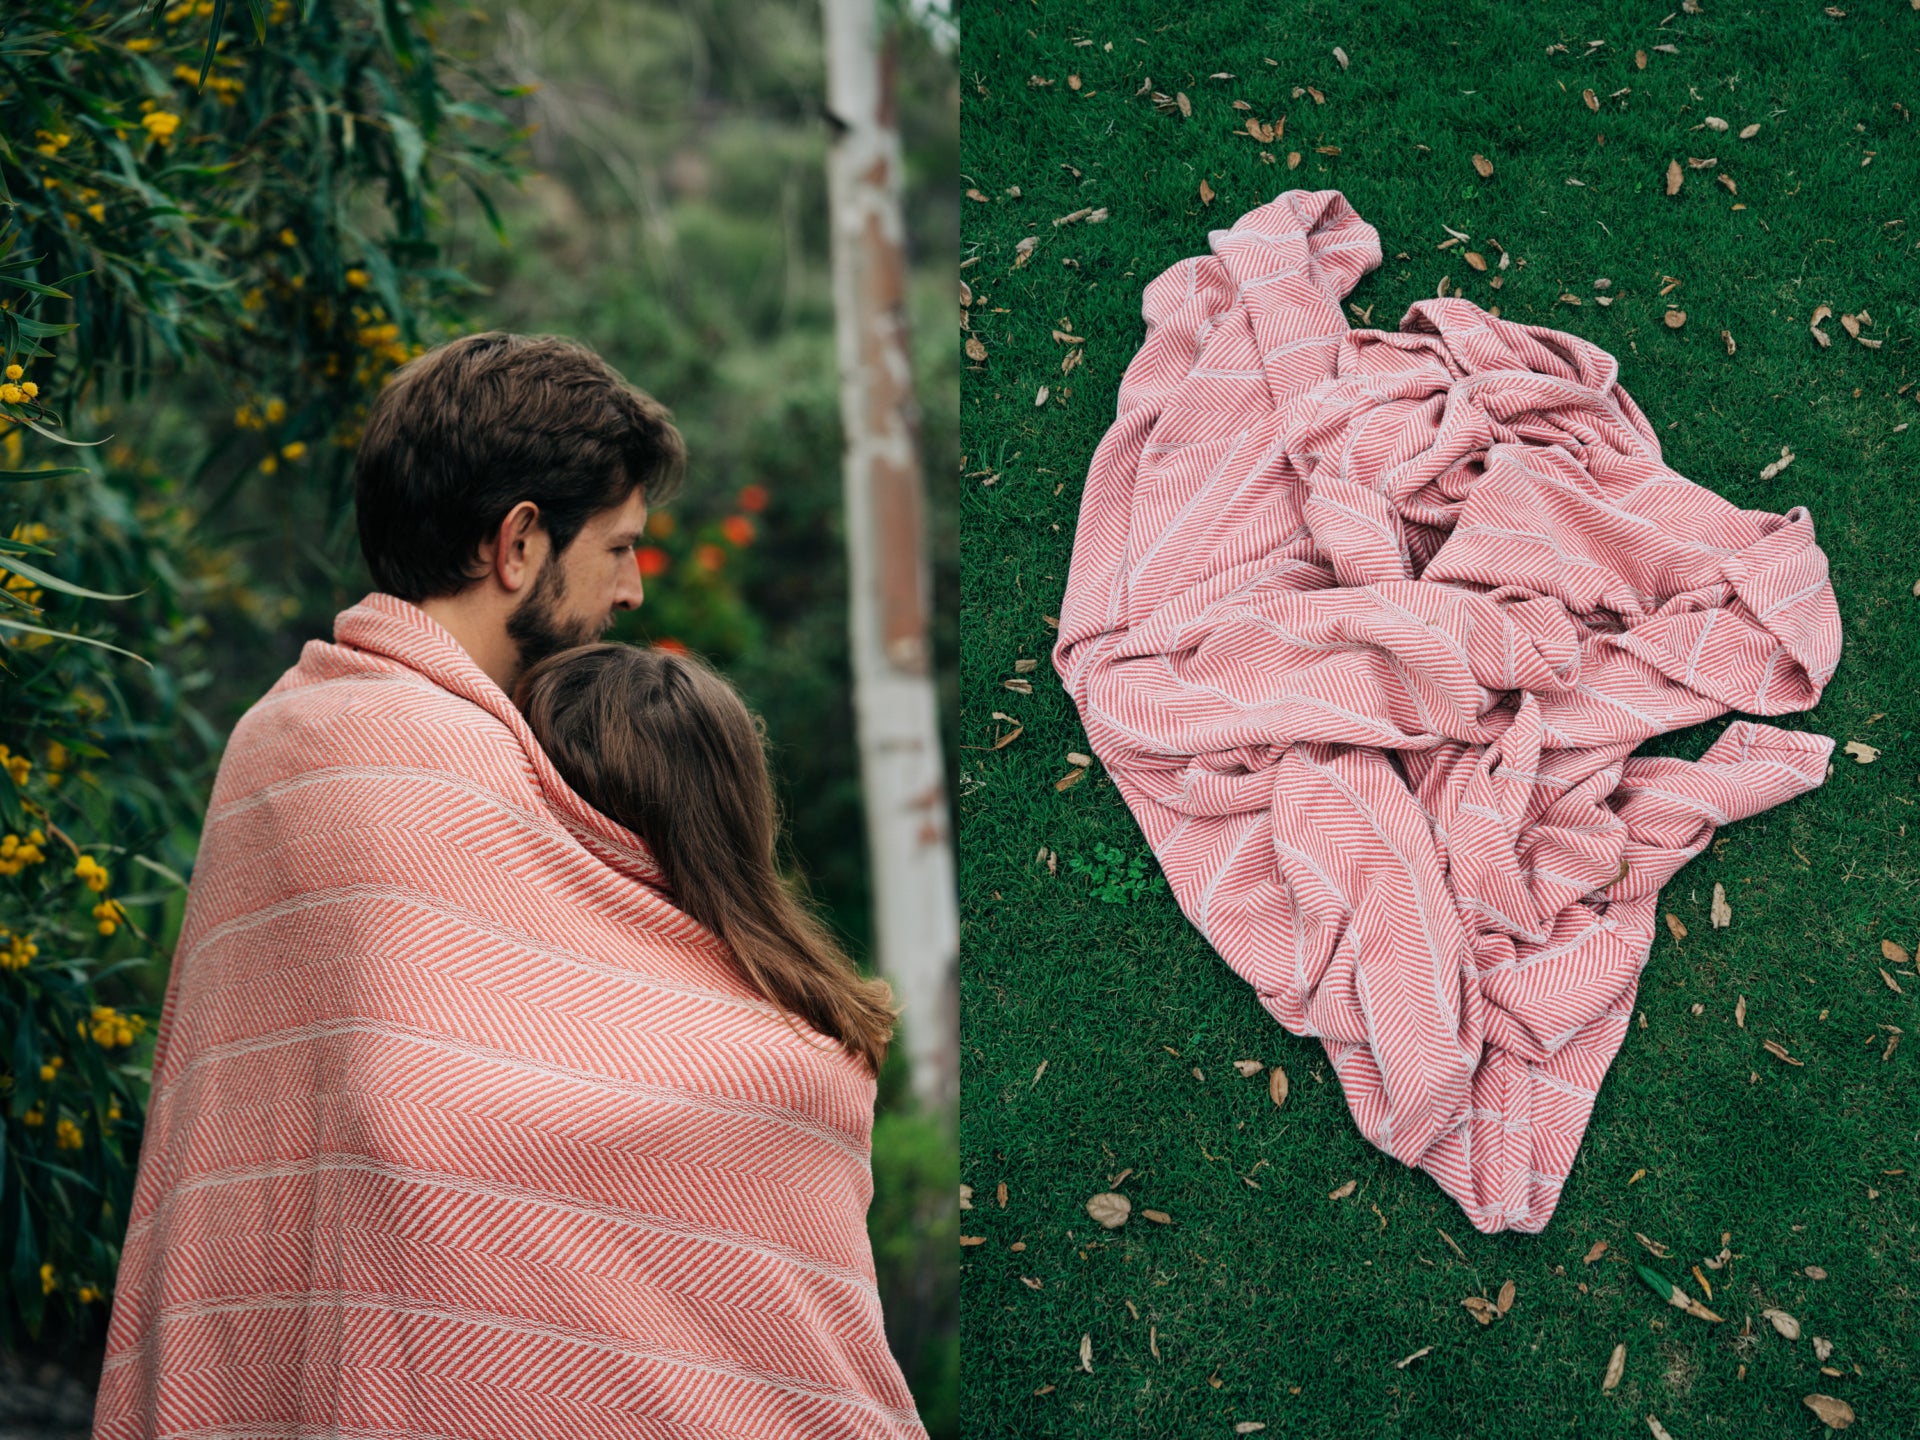 Left: Ian Ryan and Erna share a moment.  Right: The Blanket earns its characteristic grass stains—and charm.